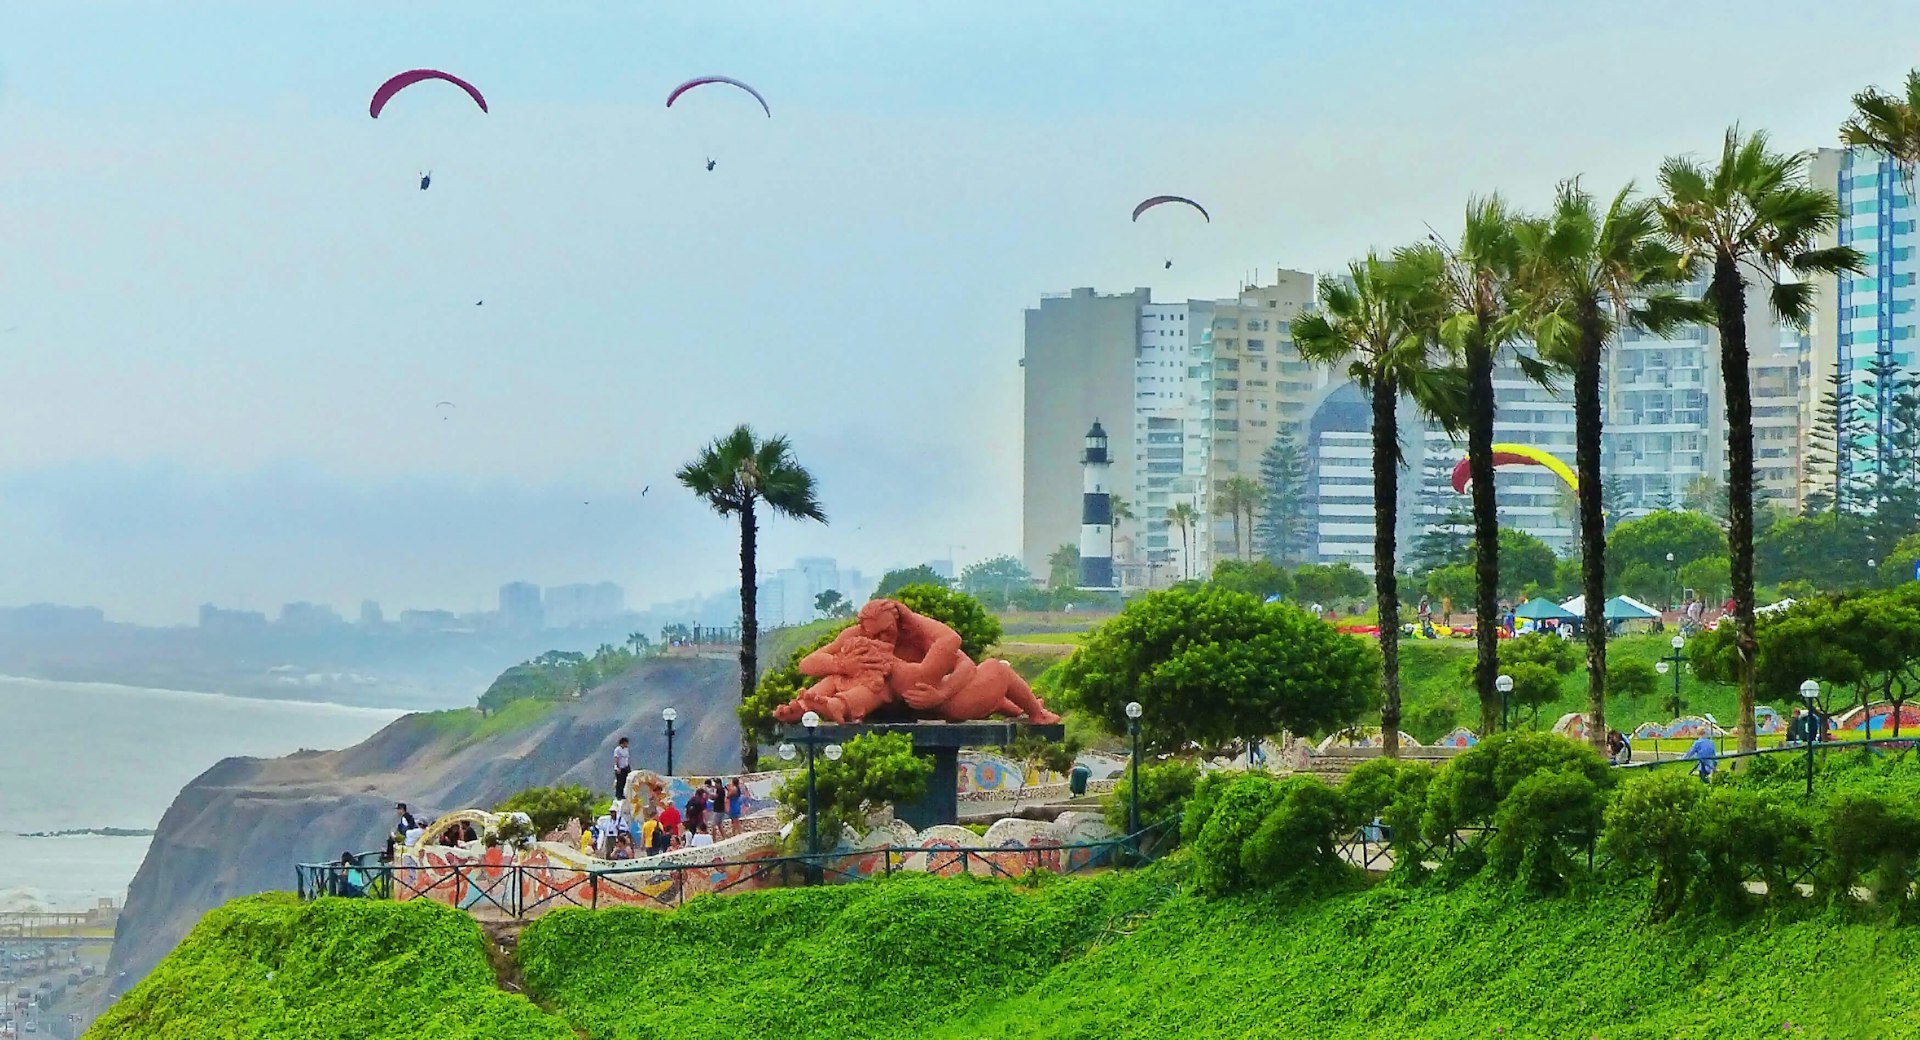 People in a park on a coastal cliff overlooking the Pacific Ocean, with a red statue of a couple embracing, paragliders overhead and a lighthouse in the background